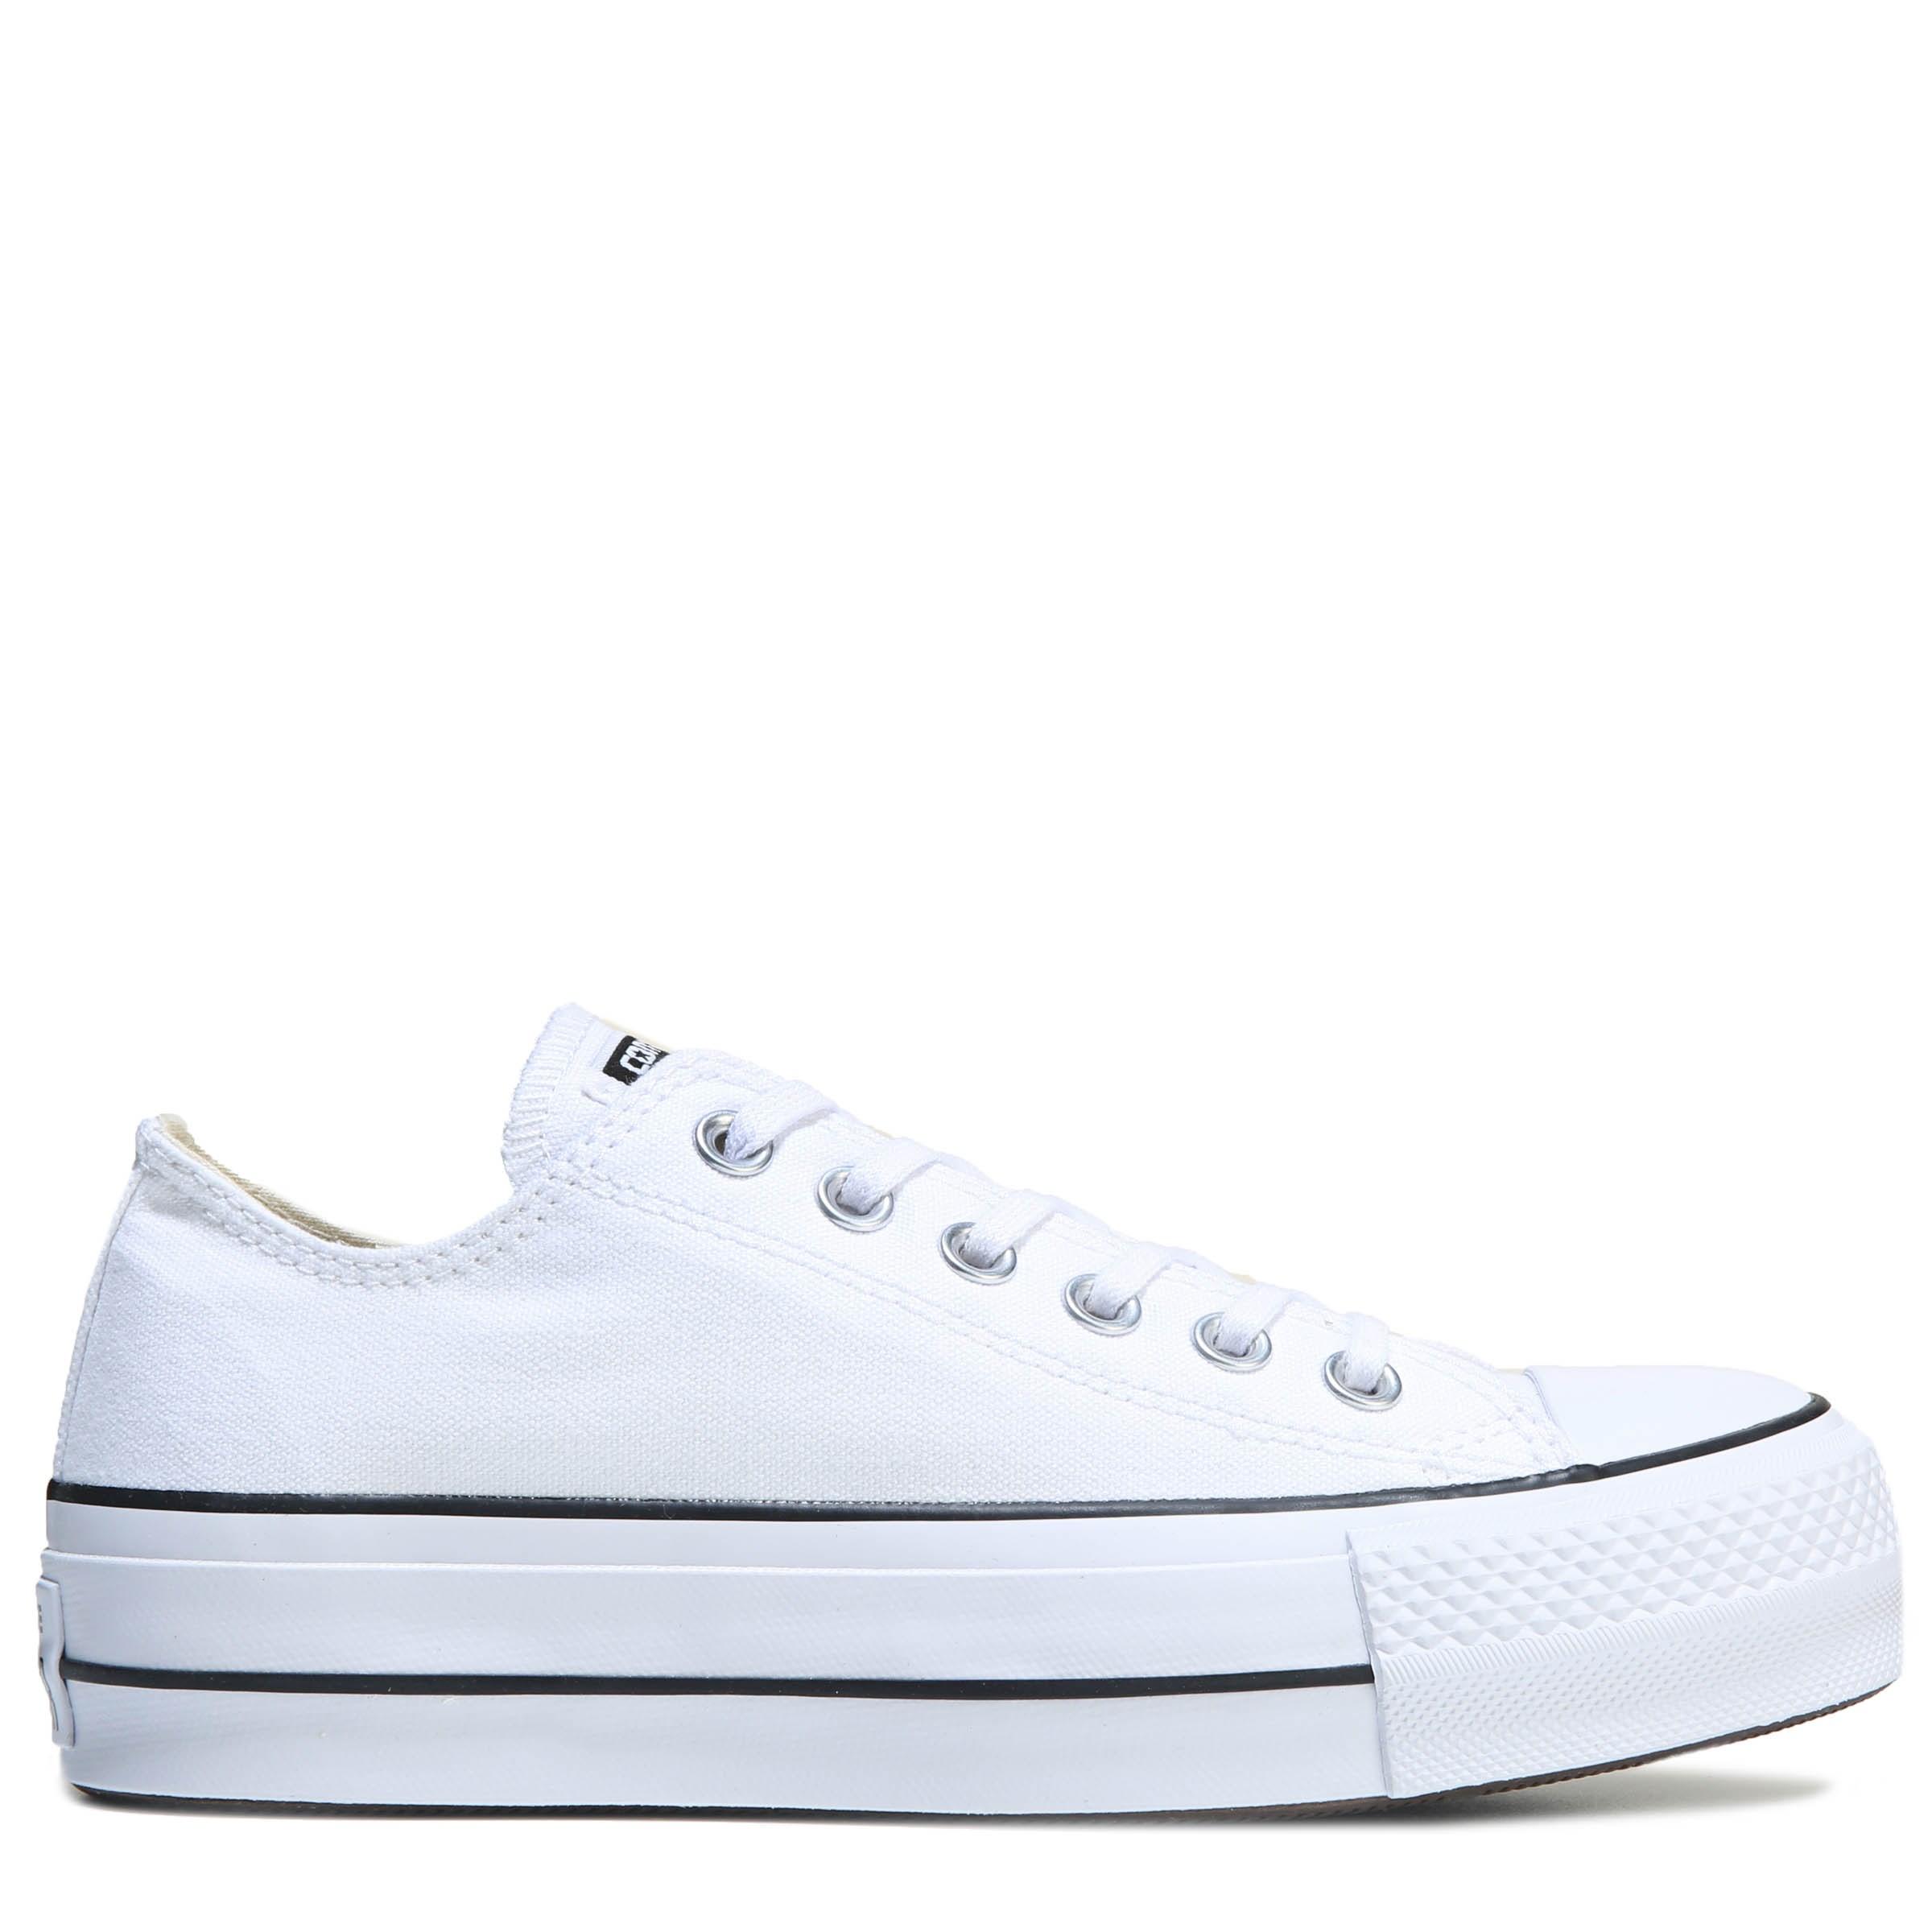 Converse Canvas Chuck Taylor All Star Lift Sneakers in White - Lyst